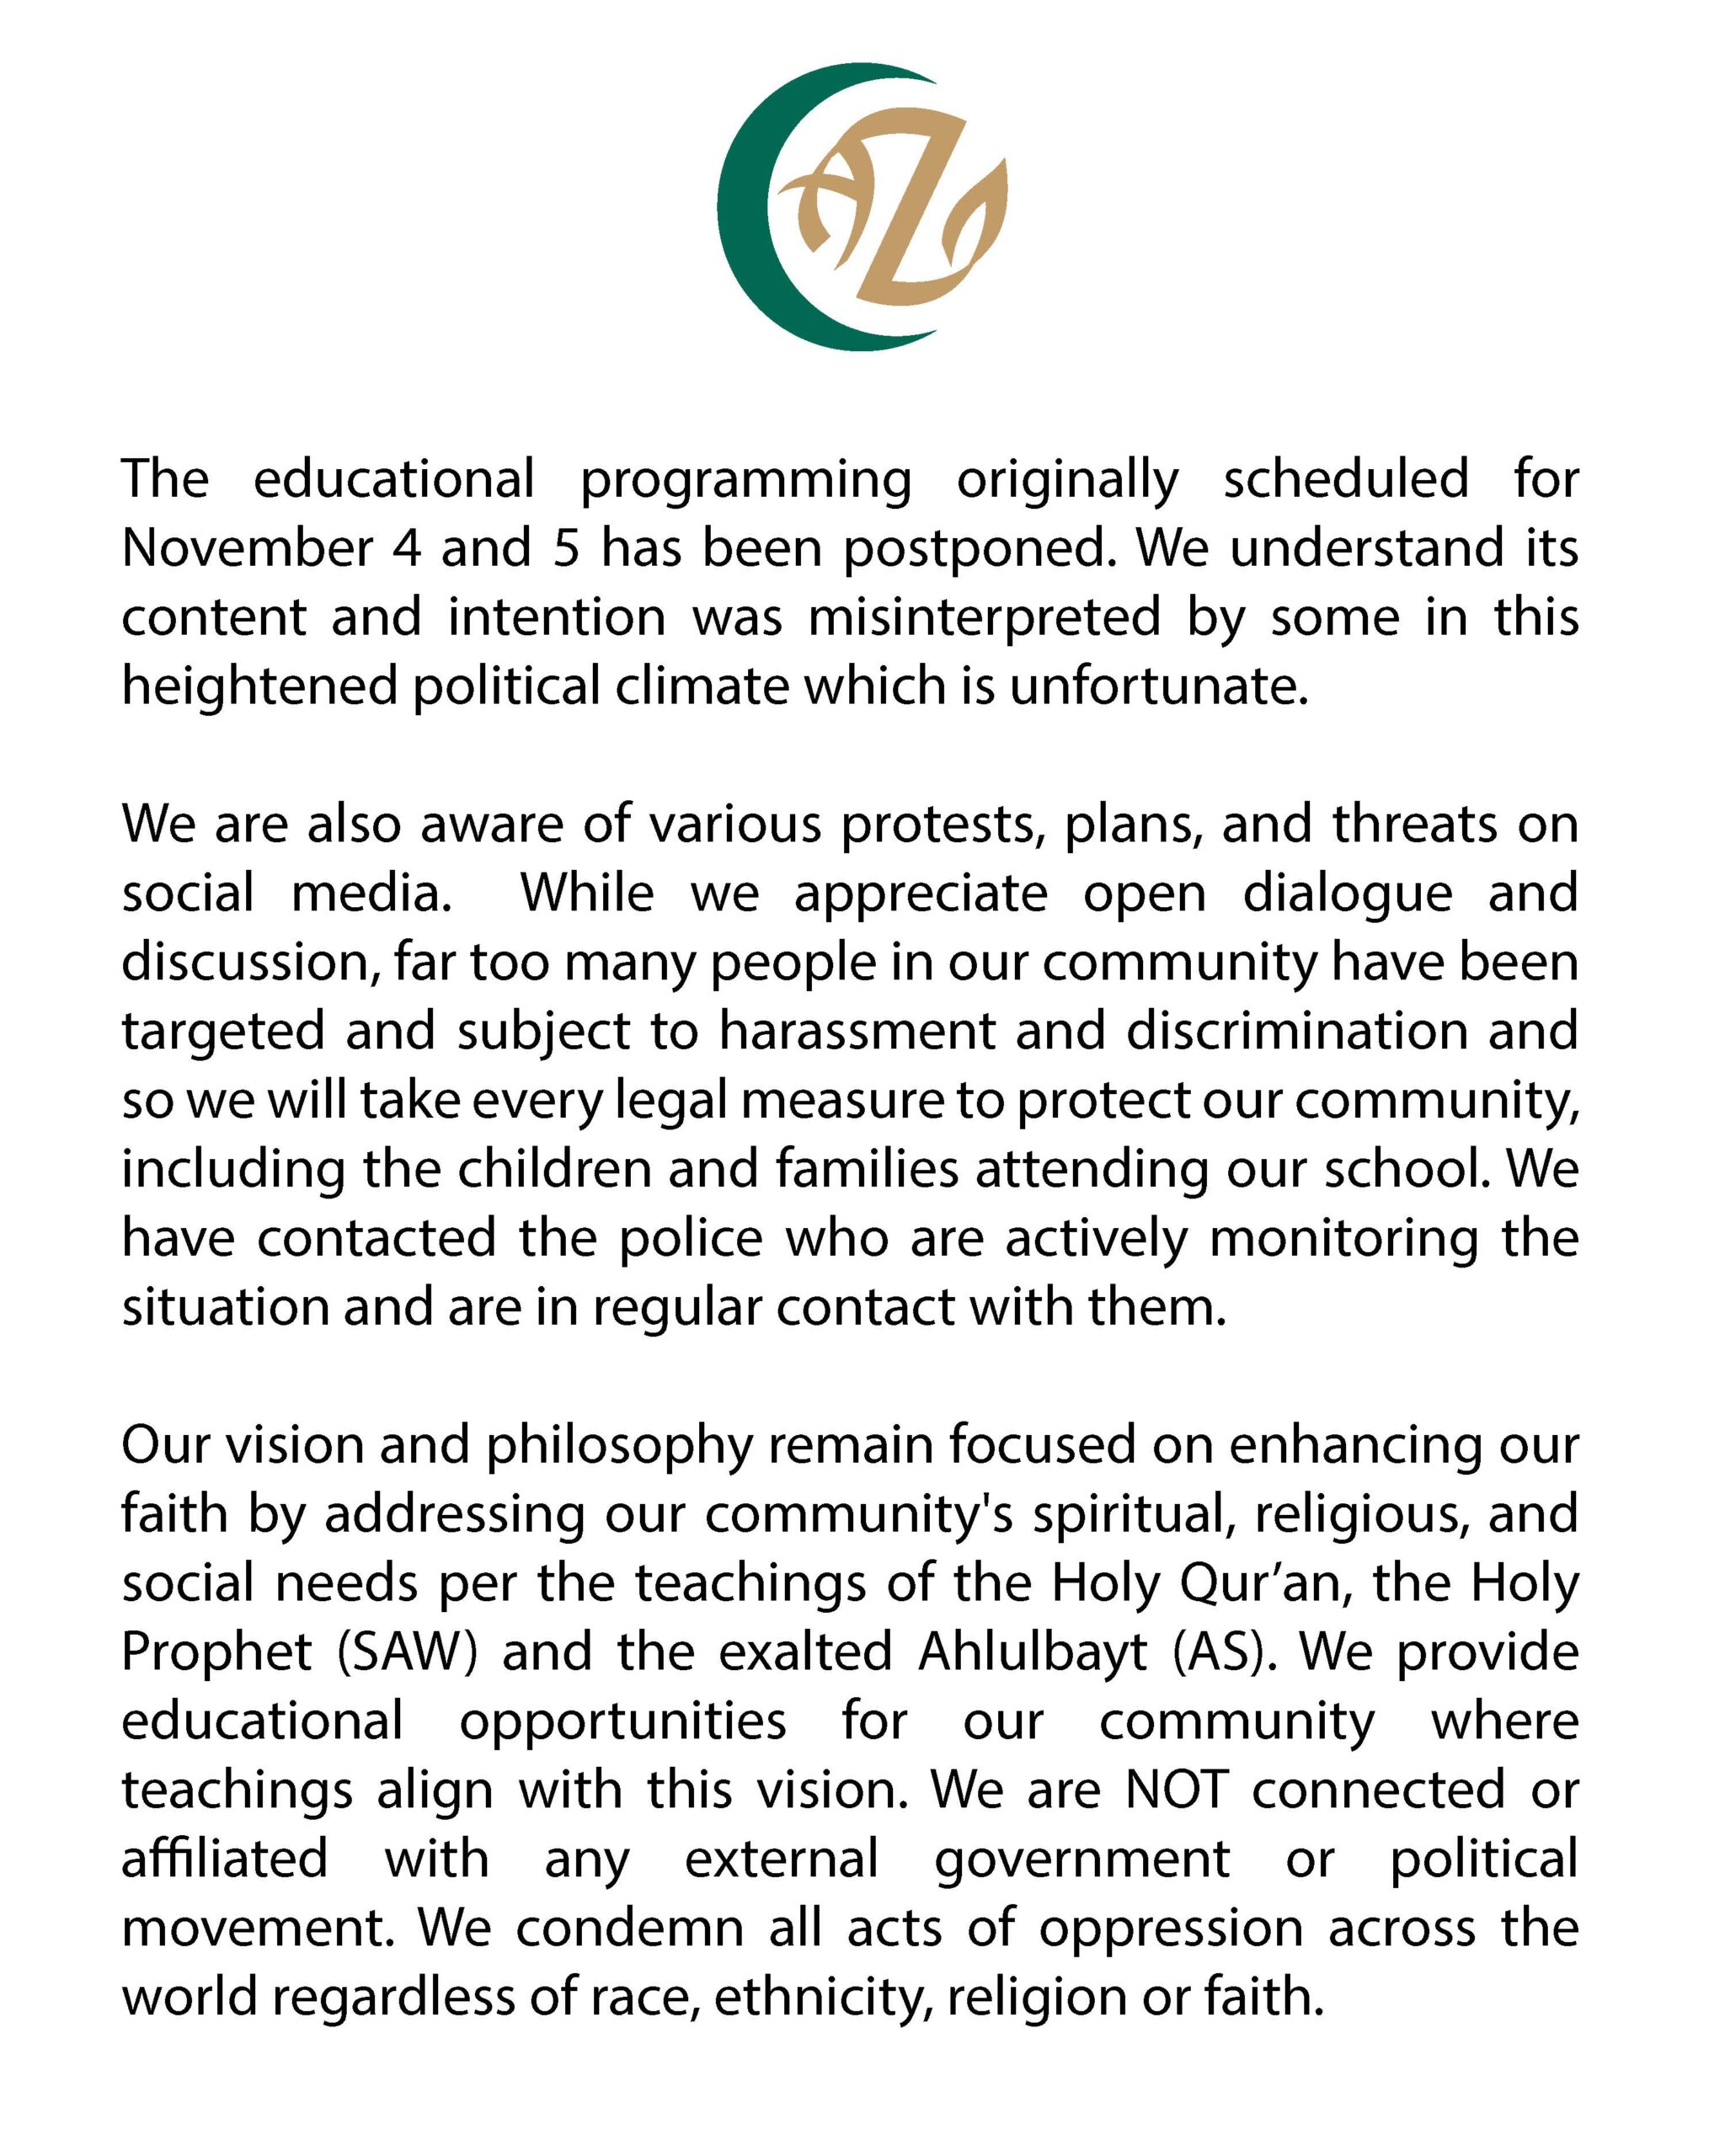 The educational programming originally scheduled for November 4 and 5 has been postponed. We understand its content and intention was misinterpreted by some in this heightened political climate which is unfortunate. We are also aware of various protests, plans, and threats on social media. While we appreciate open dialogue and discussion, far too many people in our community have been targeted and subject to harassment and discrimination and so we will take every legal measure to protect our community, including the children and families attending our school. We have contacted the police who are actively monitoring the situation and are in regular contact with them. Our vision and philosophy remain focused on enhancing our faith by addressing our community's spiritual, religious, and social needs per the teachings of the Holy Qur’an, the Holy Prophet (SAW) and the exalted Ahlulbayt (AS). We provide educational opportunities for our community where teachings align with this vision. We are NOT connected or affiliated with any external government or political movement. We condemn all acts of oppression across the world regardless of race, ethnicity, religion or faith.